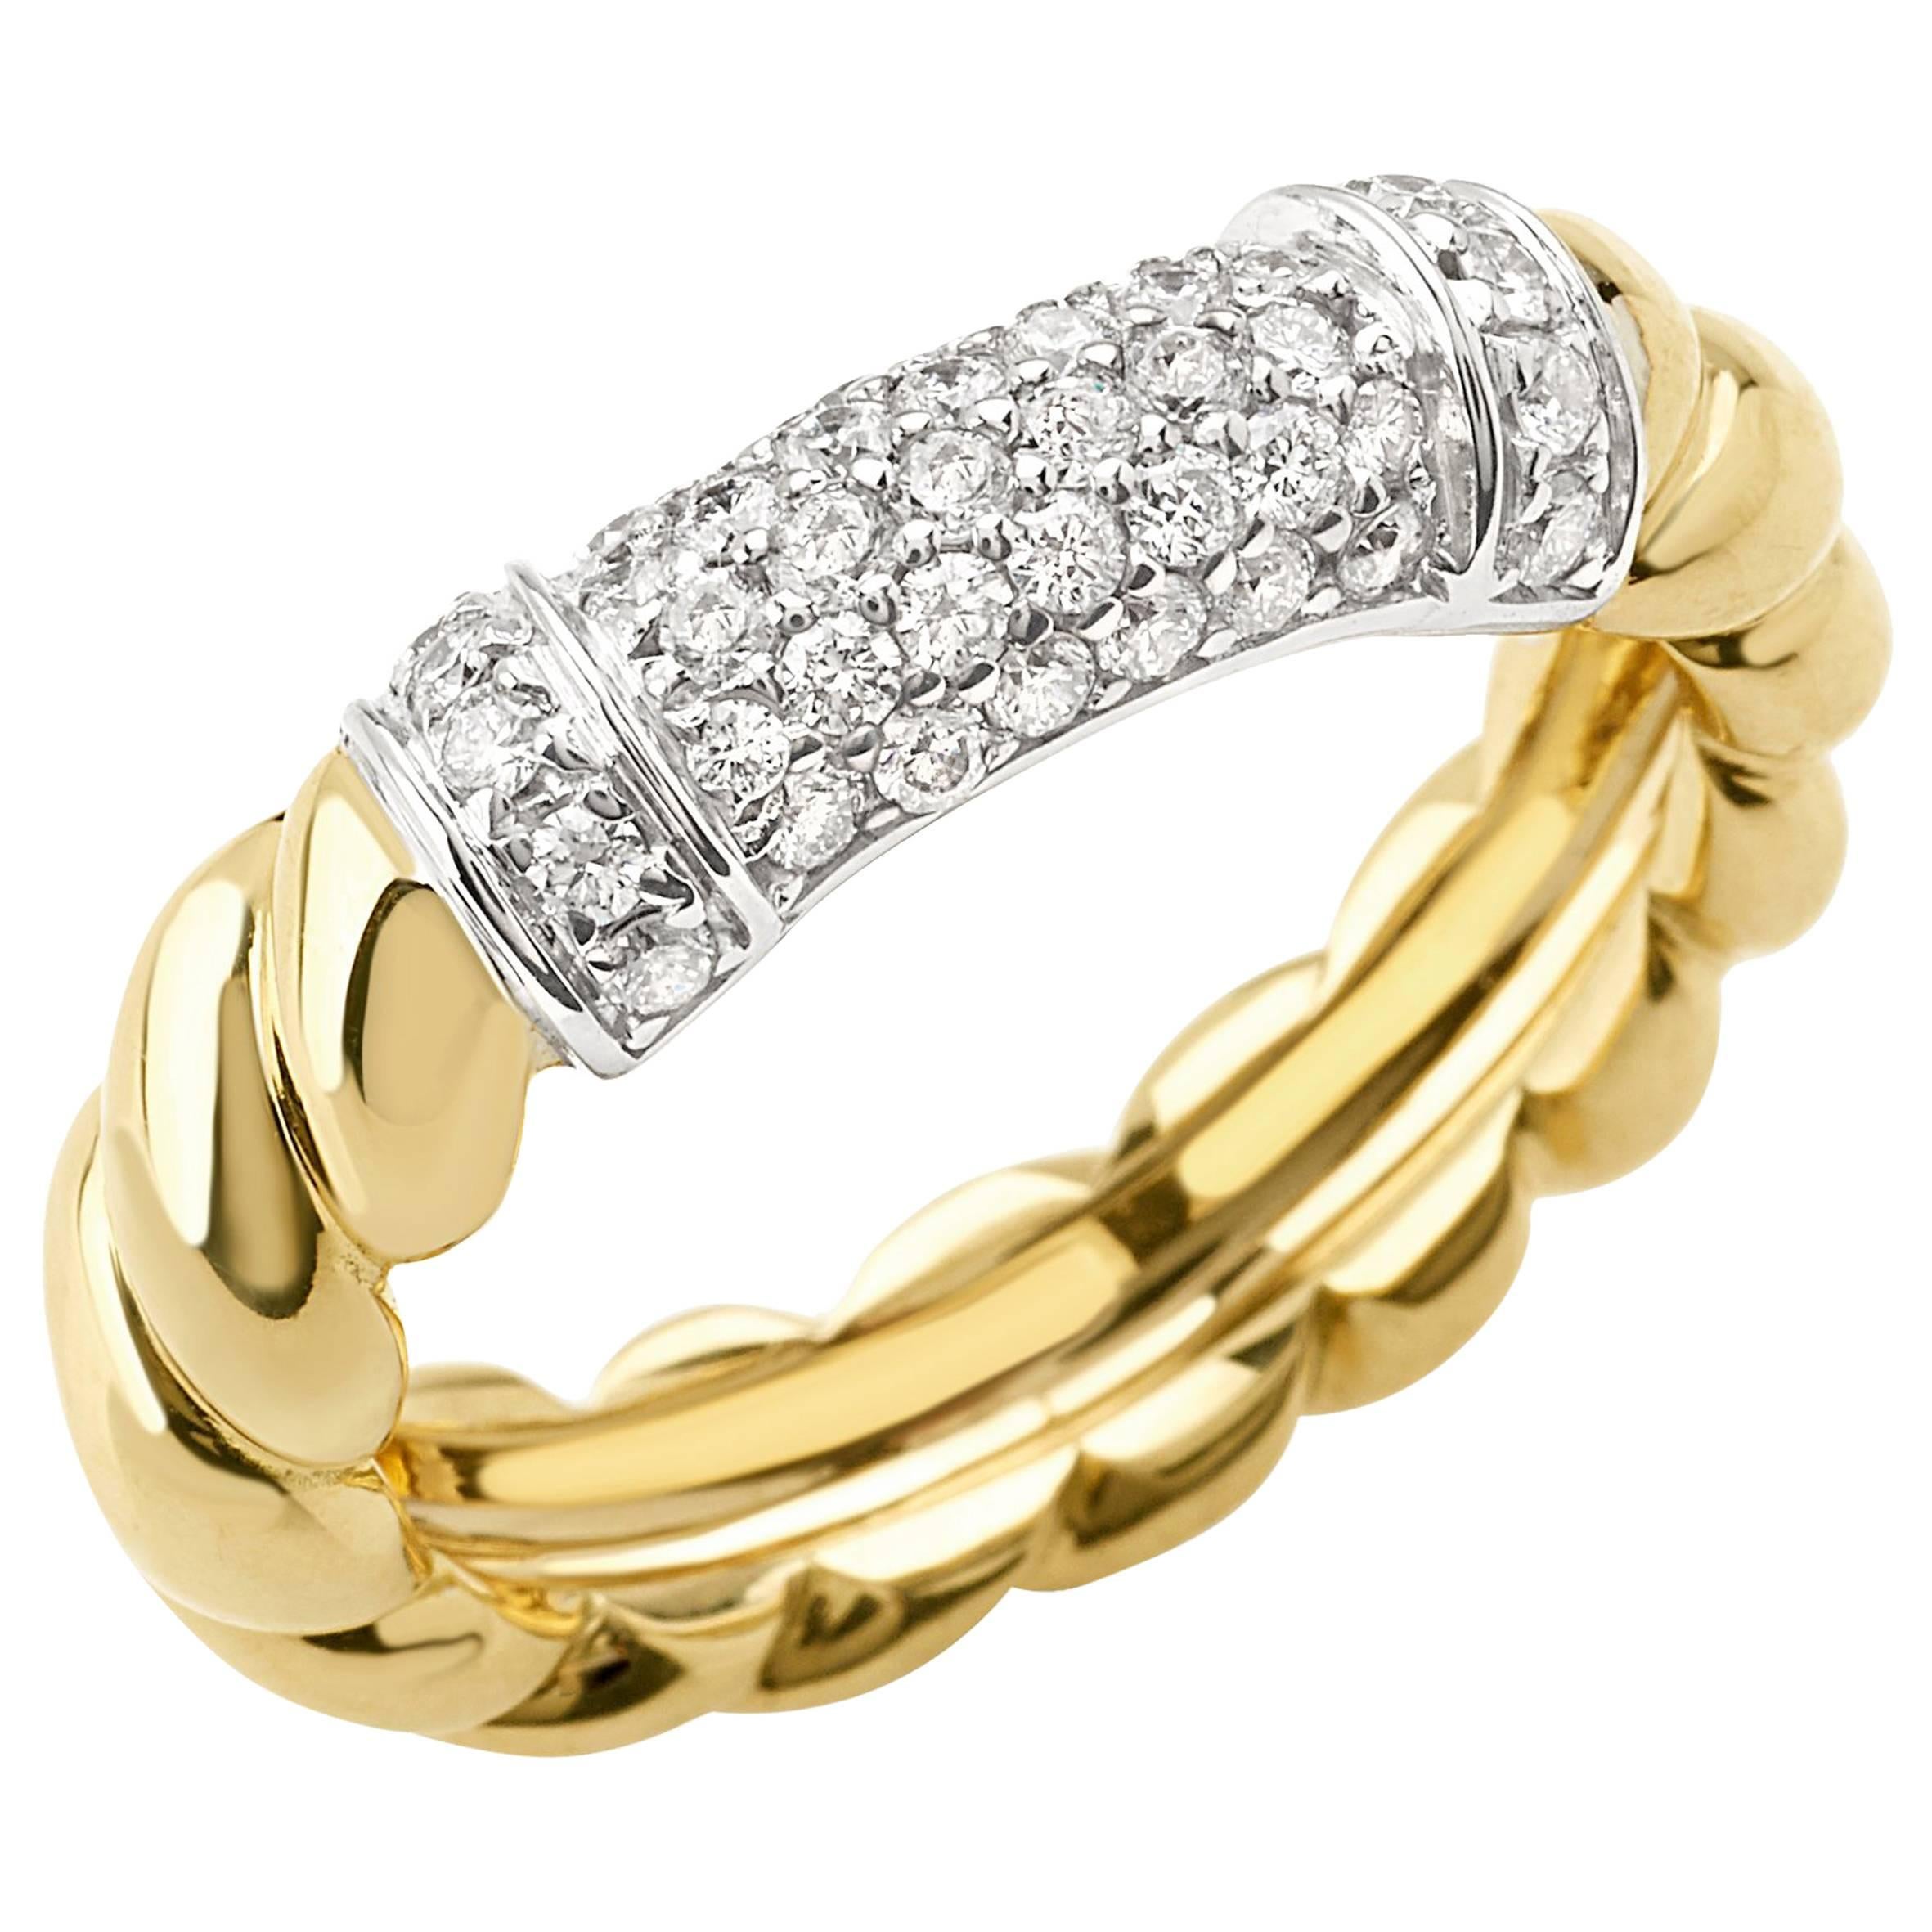 Ring from the Collection "Rope" 18 Karat Yellow Gold and Diamonds